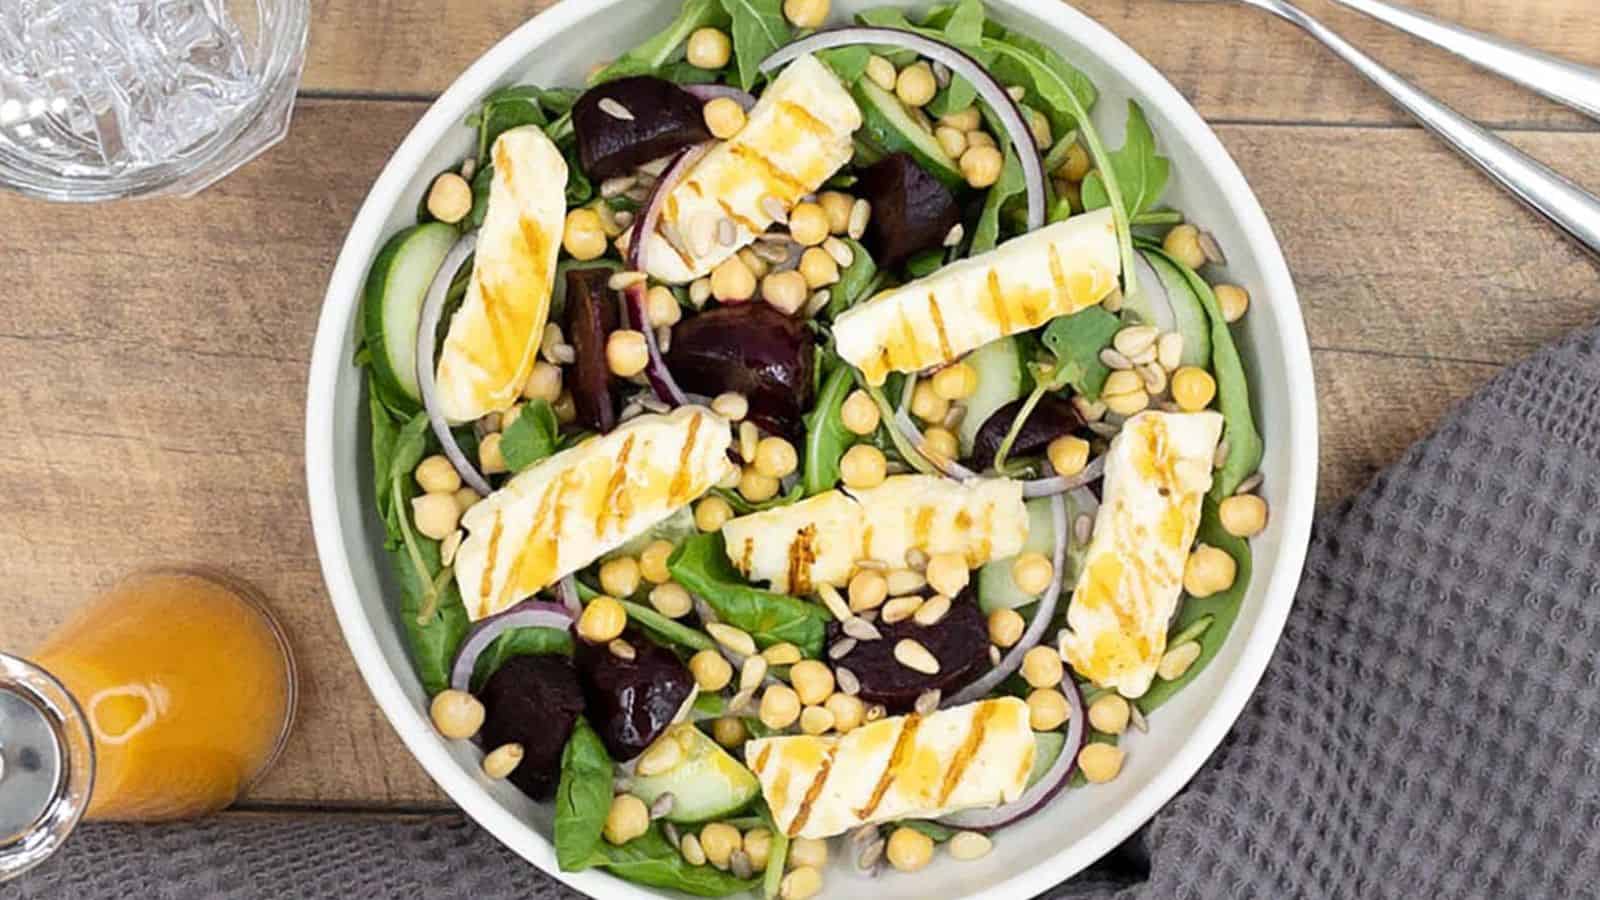 <p>Treat yourself to a satisfying salad experience with Beetroot and Grilled Halloumi Salad! With its vibrant colors and hearty ingredients, this salad is as visually appealing as it is delicious. Whether you’re vegetarian or just looking for a meatless meal option, this salad is sure to satisfy you.<br><strong>Get the Recipe: </strong><a href="https://www.splashoftaste.com/beetroot-and-grilled-halloumi-salad/?utm_source=msn&utm_medium=page&utm_campaign=Salad%20obsessed!%2011%20salads%20we%20can't%20stop%20eating%20(seriously!)">Beetroot and Grilled Halloumi Salad</a></p>